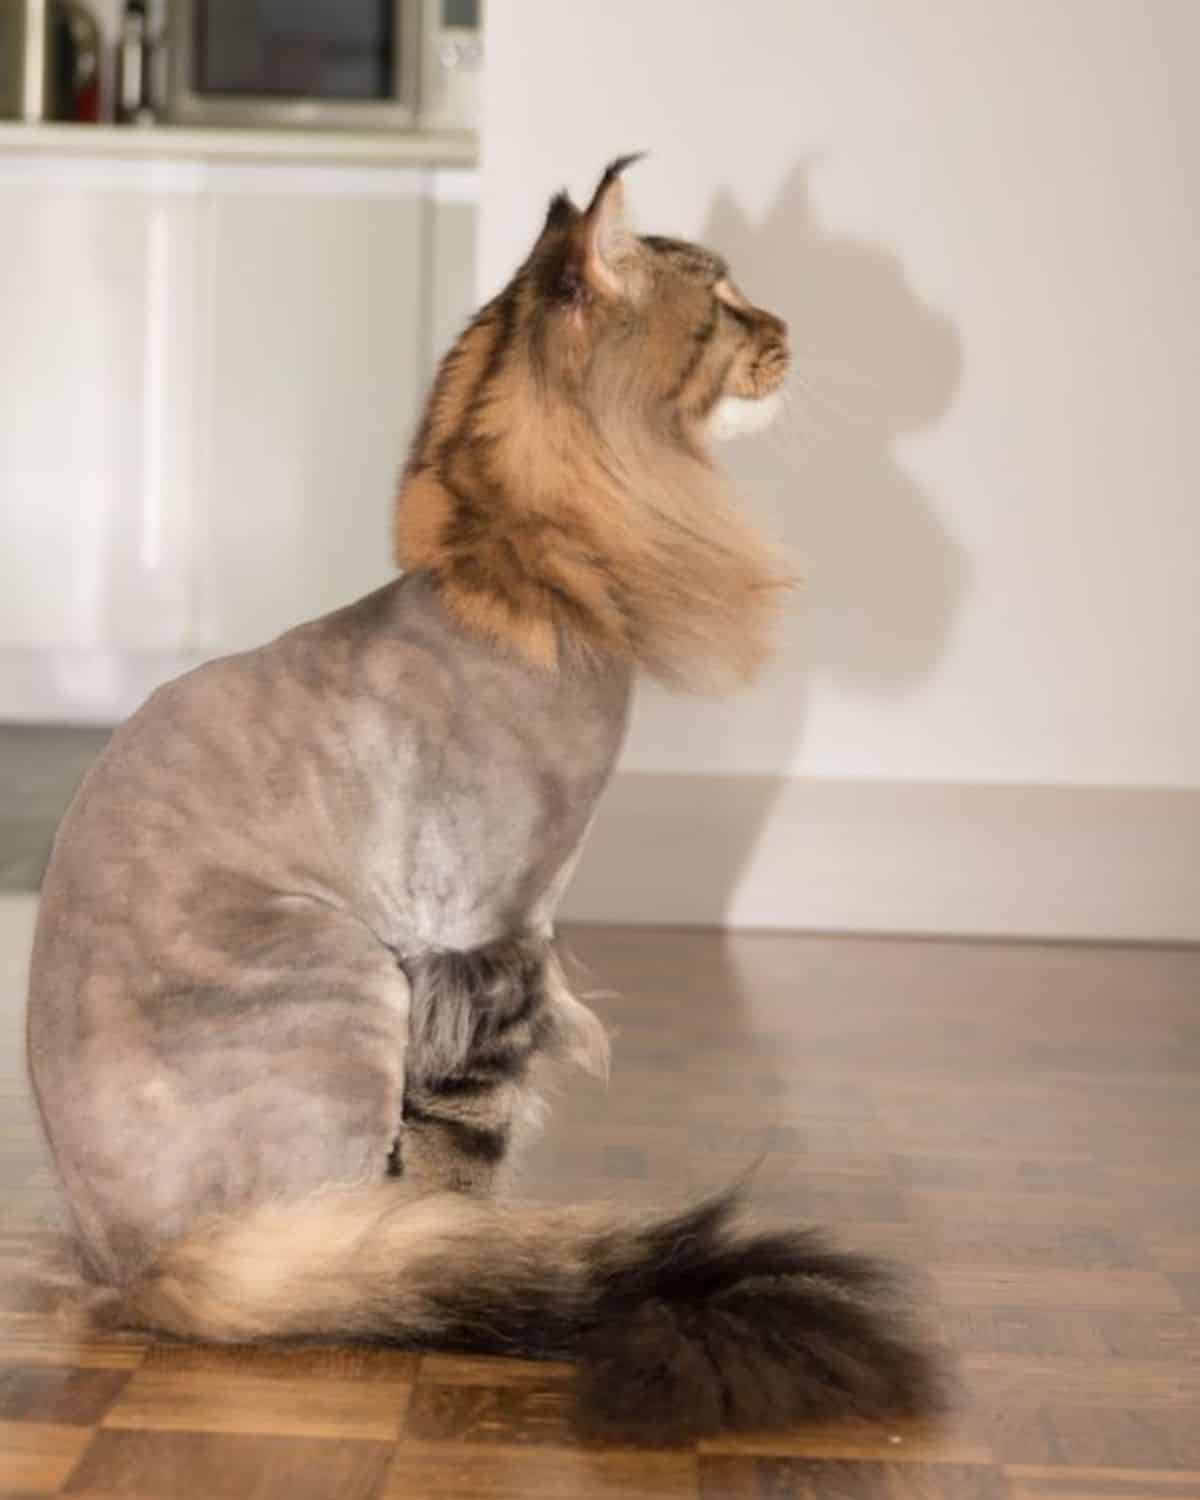 A tabby maine coon with a lion cut sitting on a floor.